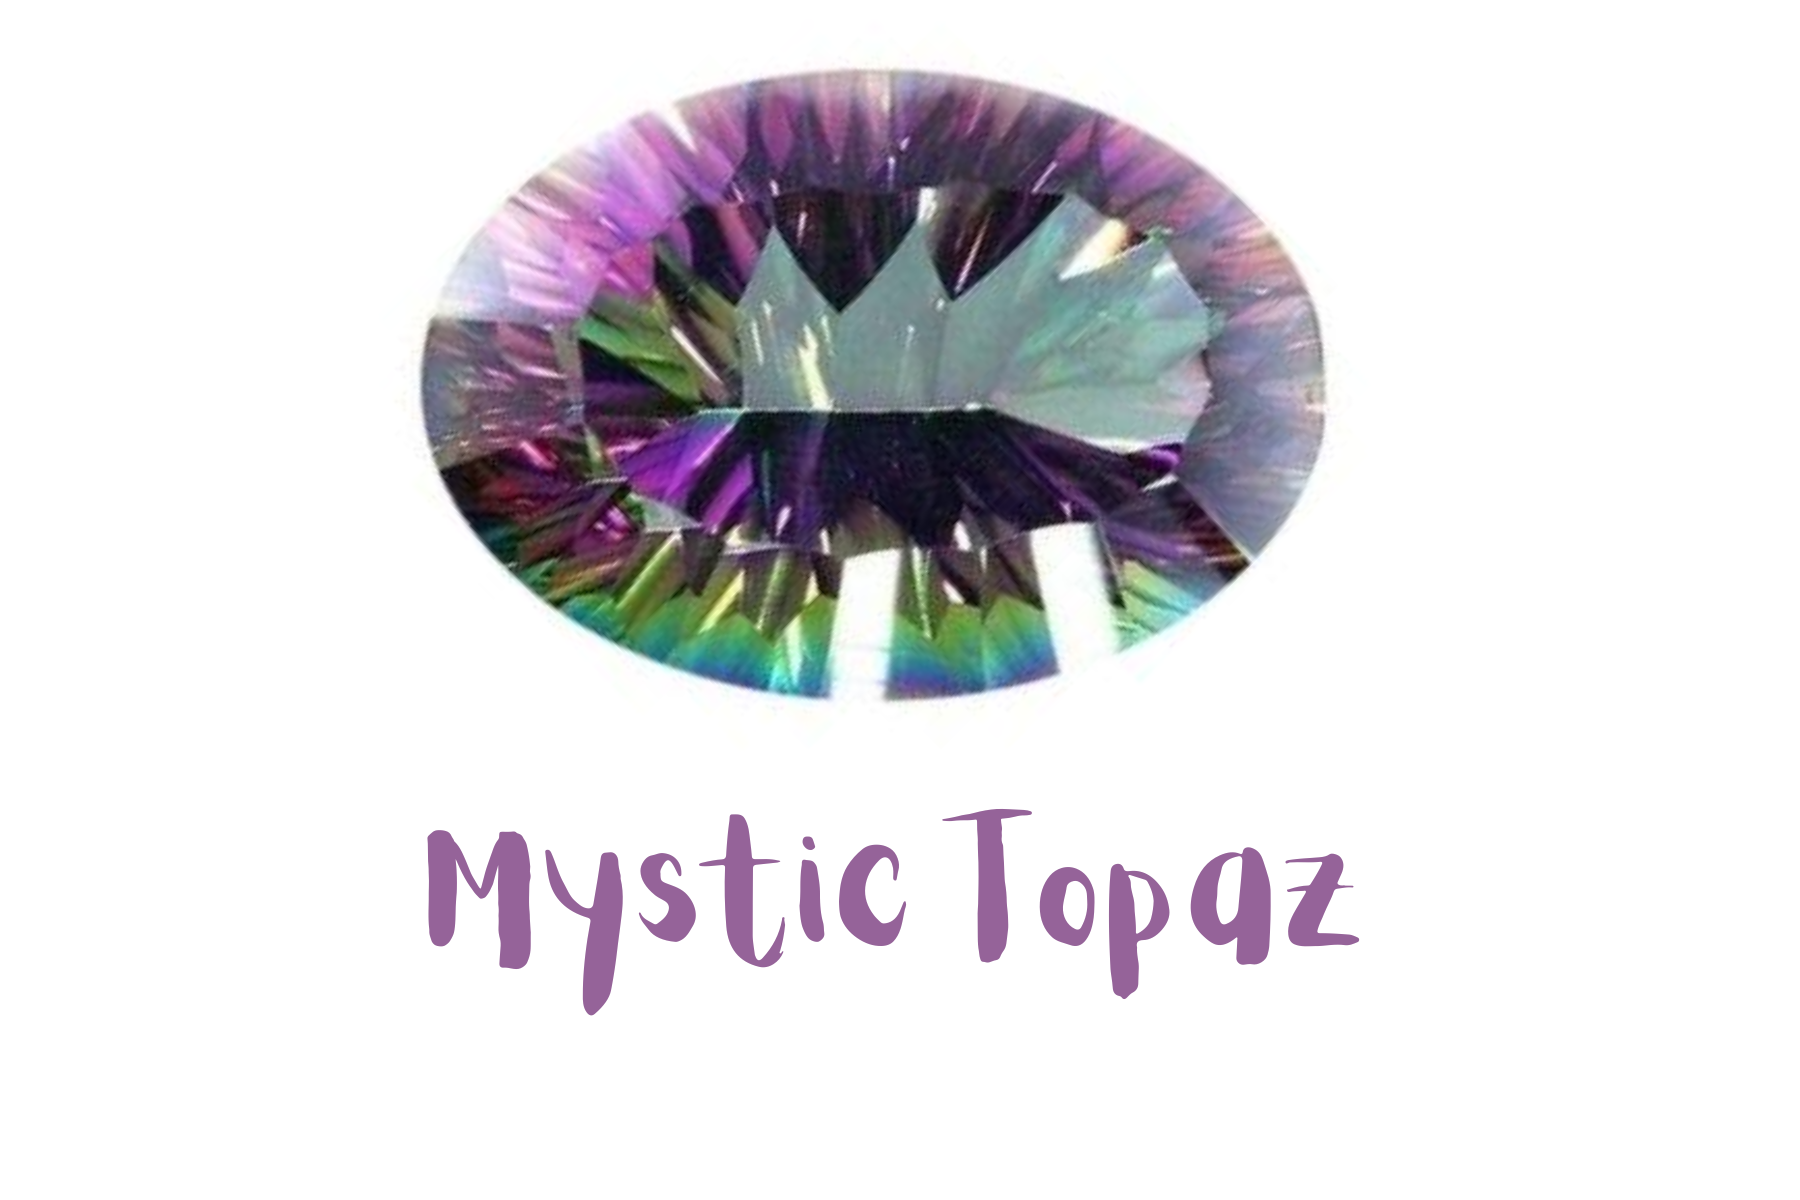 Oblong mystic topaz with rainbow color effect